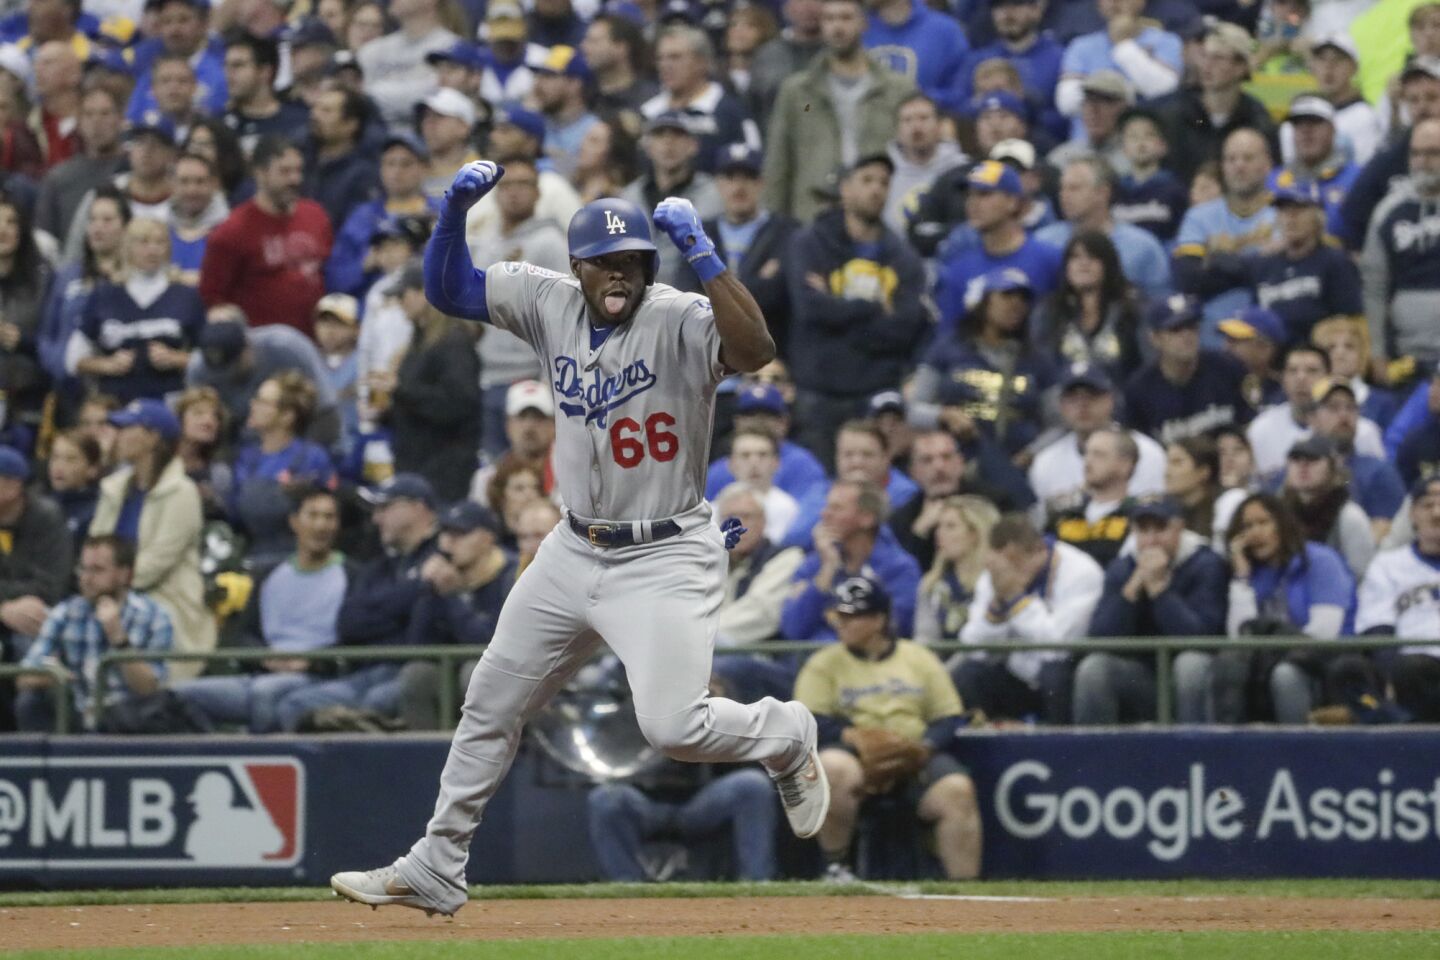 Yasiel Puig celebrates after hitting a three run homer in the sixth inning.